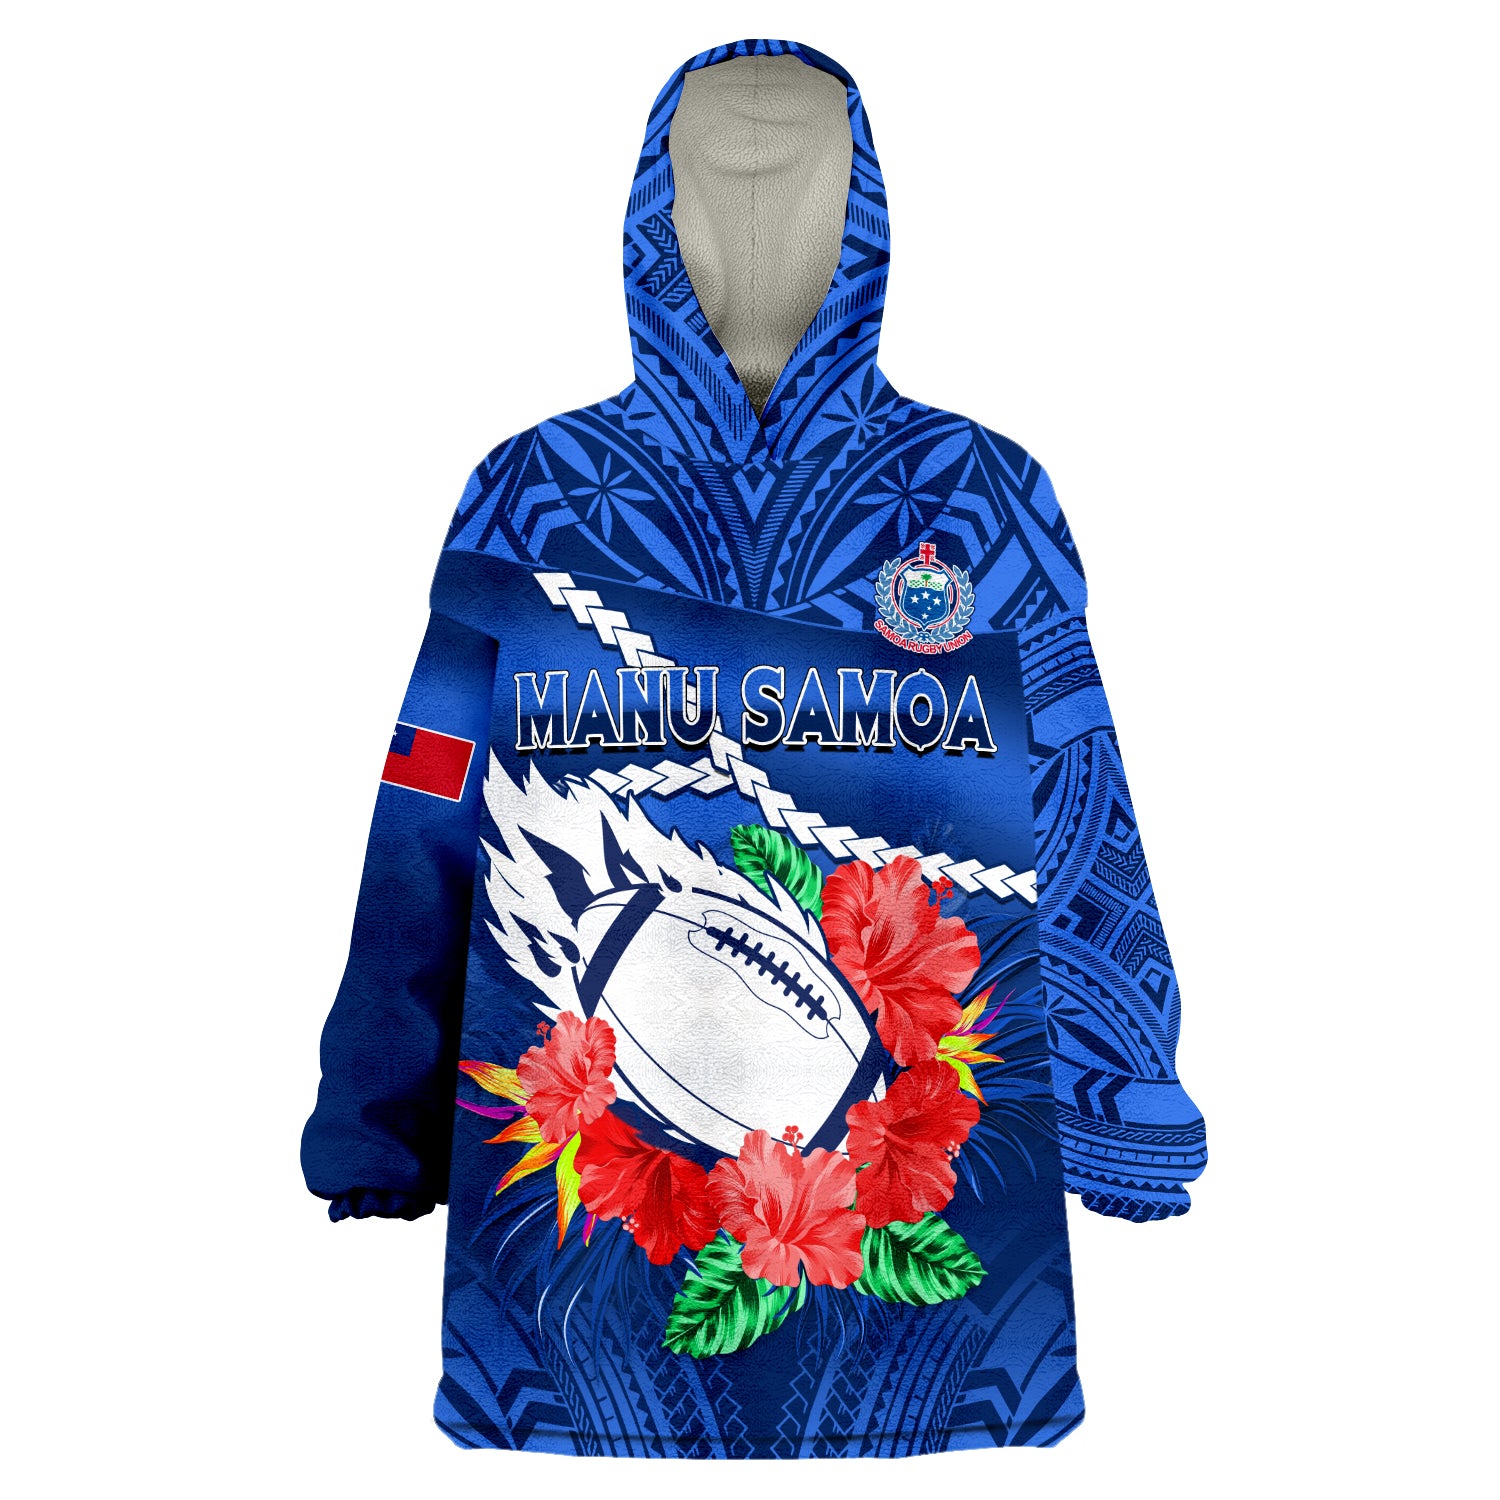 (Custom Text And Number) Samoa Rugby Manu Samoa Polynesian Hibiscus Blue Style Wearable Blanket Hoodie LT14 Unisex One Size - Polynesian Pride